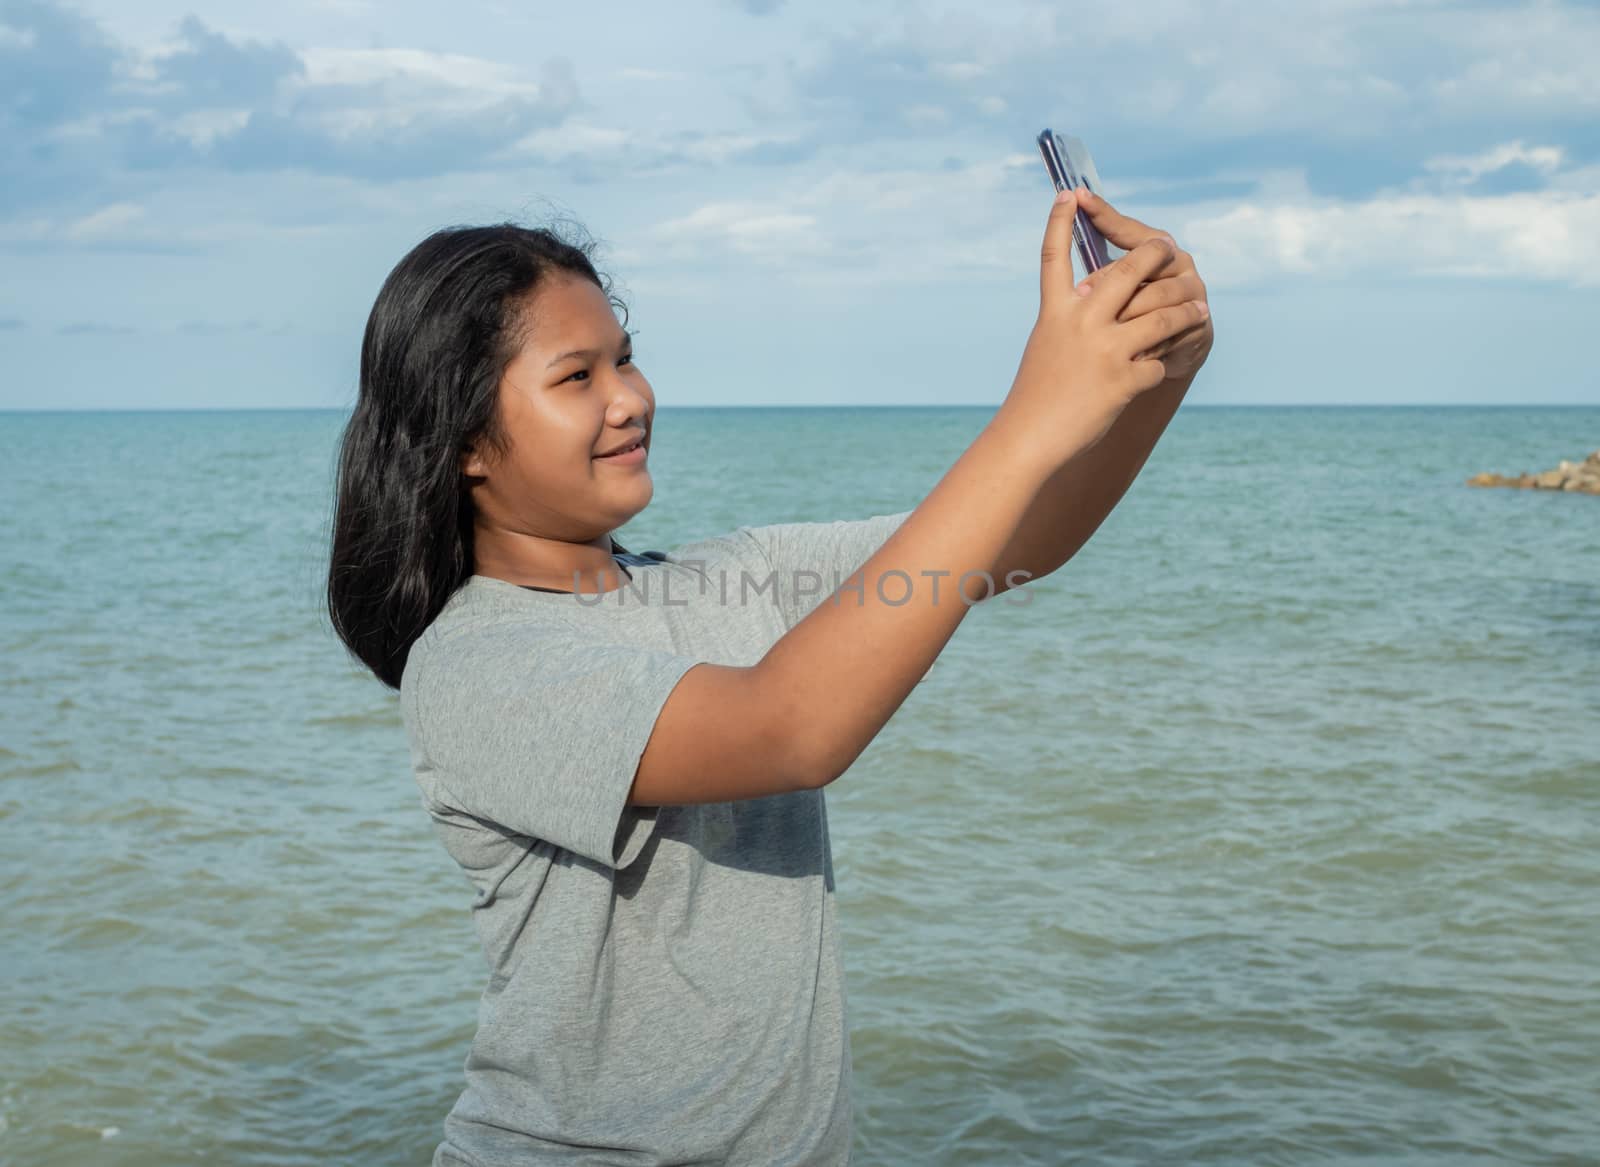 A girl using a phone to take a selfie on a sea background by Unimages2527